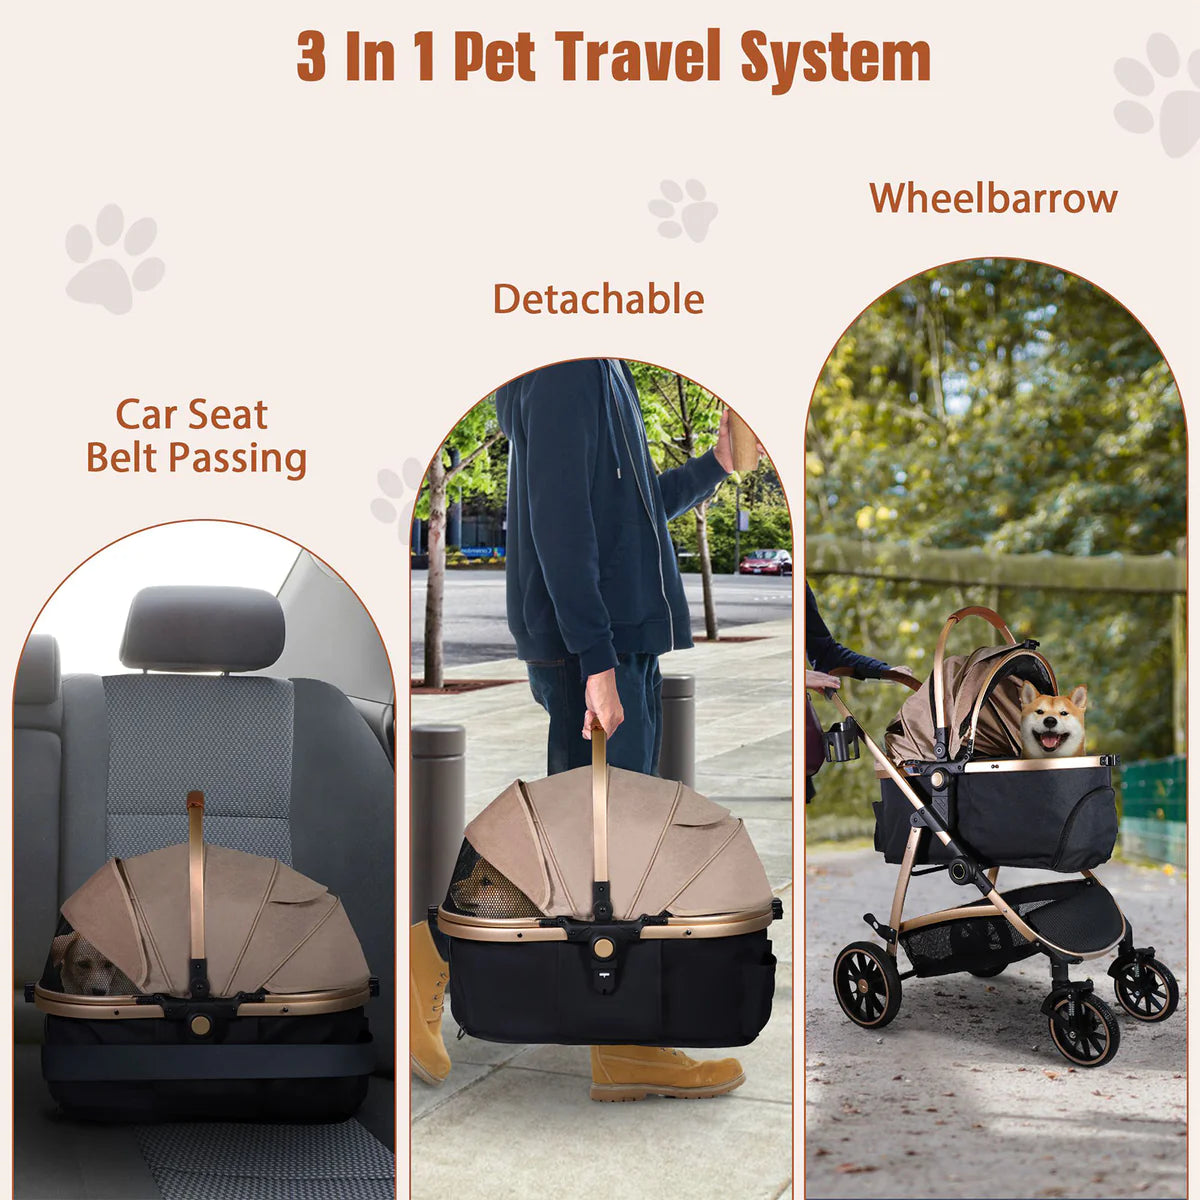 Pet Stroller for Small Dogs Cats, Stroller with Detachable Carrier, Telescopic Handle, One-Hand Quick Fold,Gold